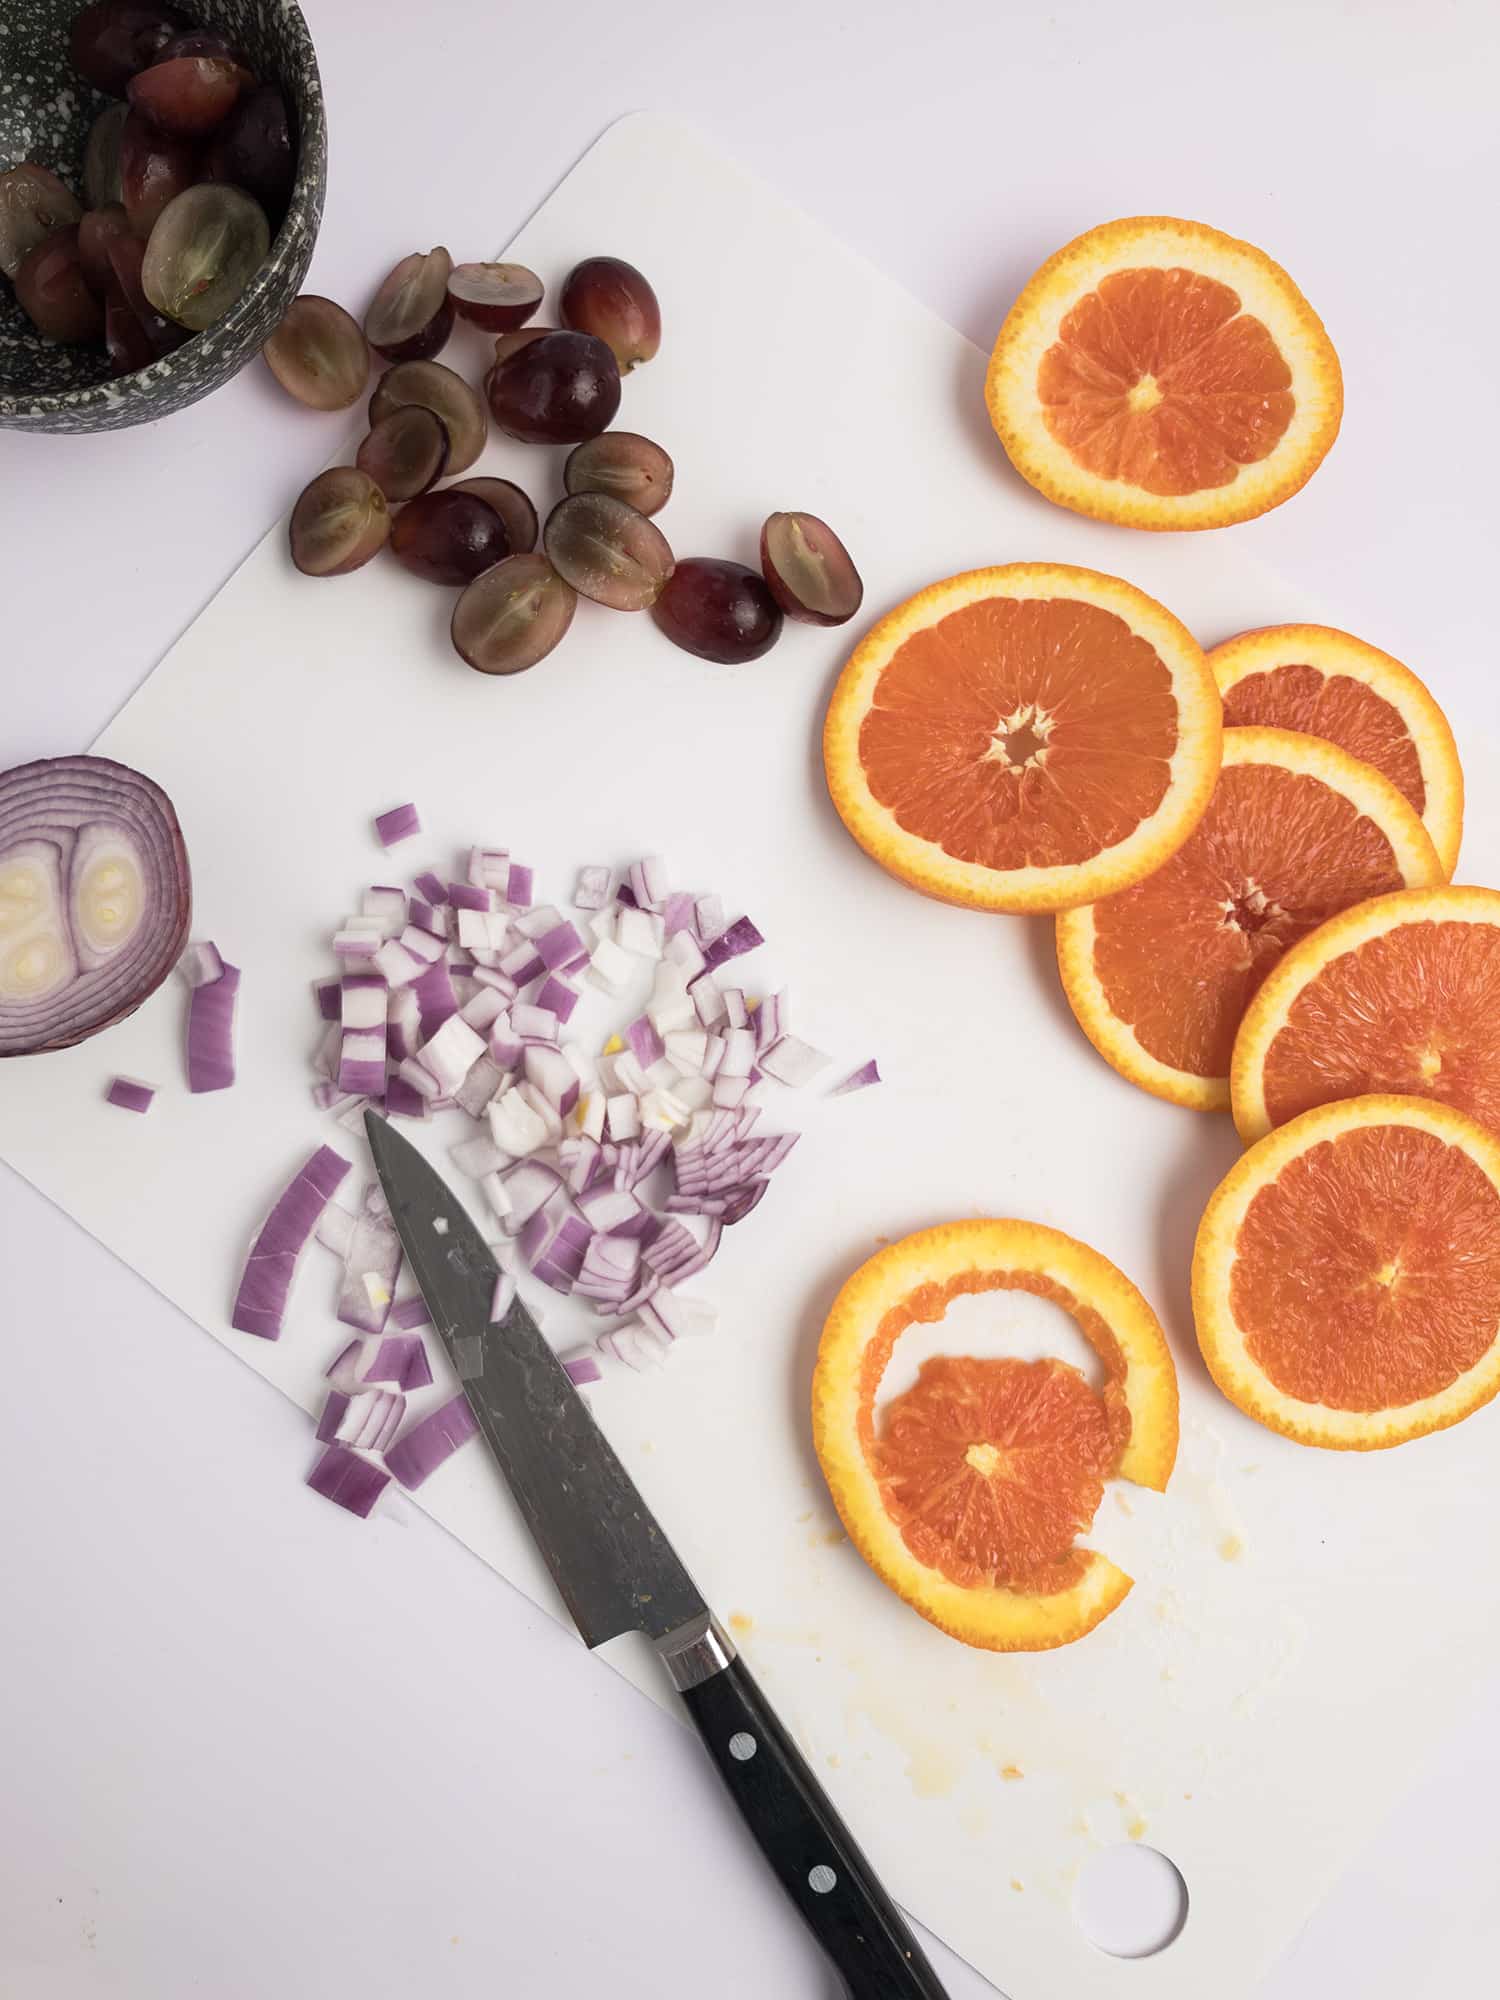 Top-down view of sliced oranges, sliced grapes, and red onions with a knife against a white background. 